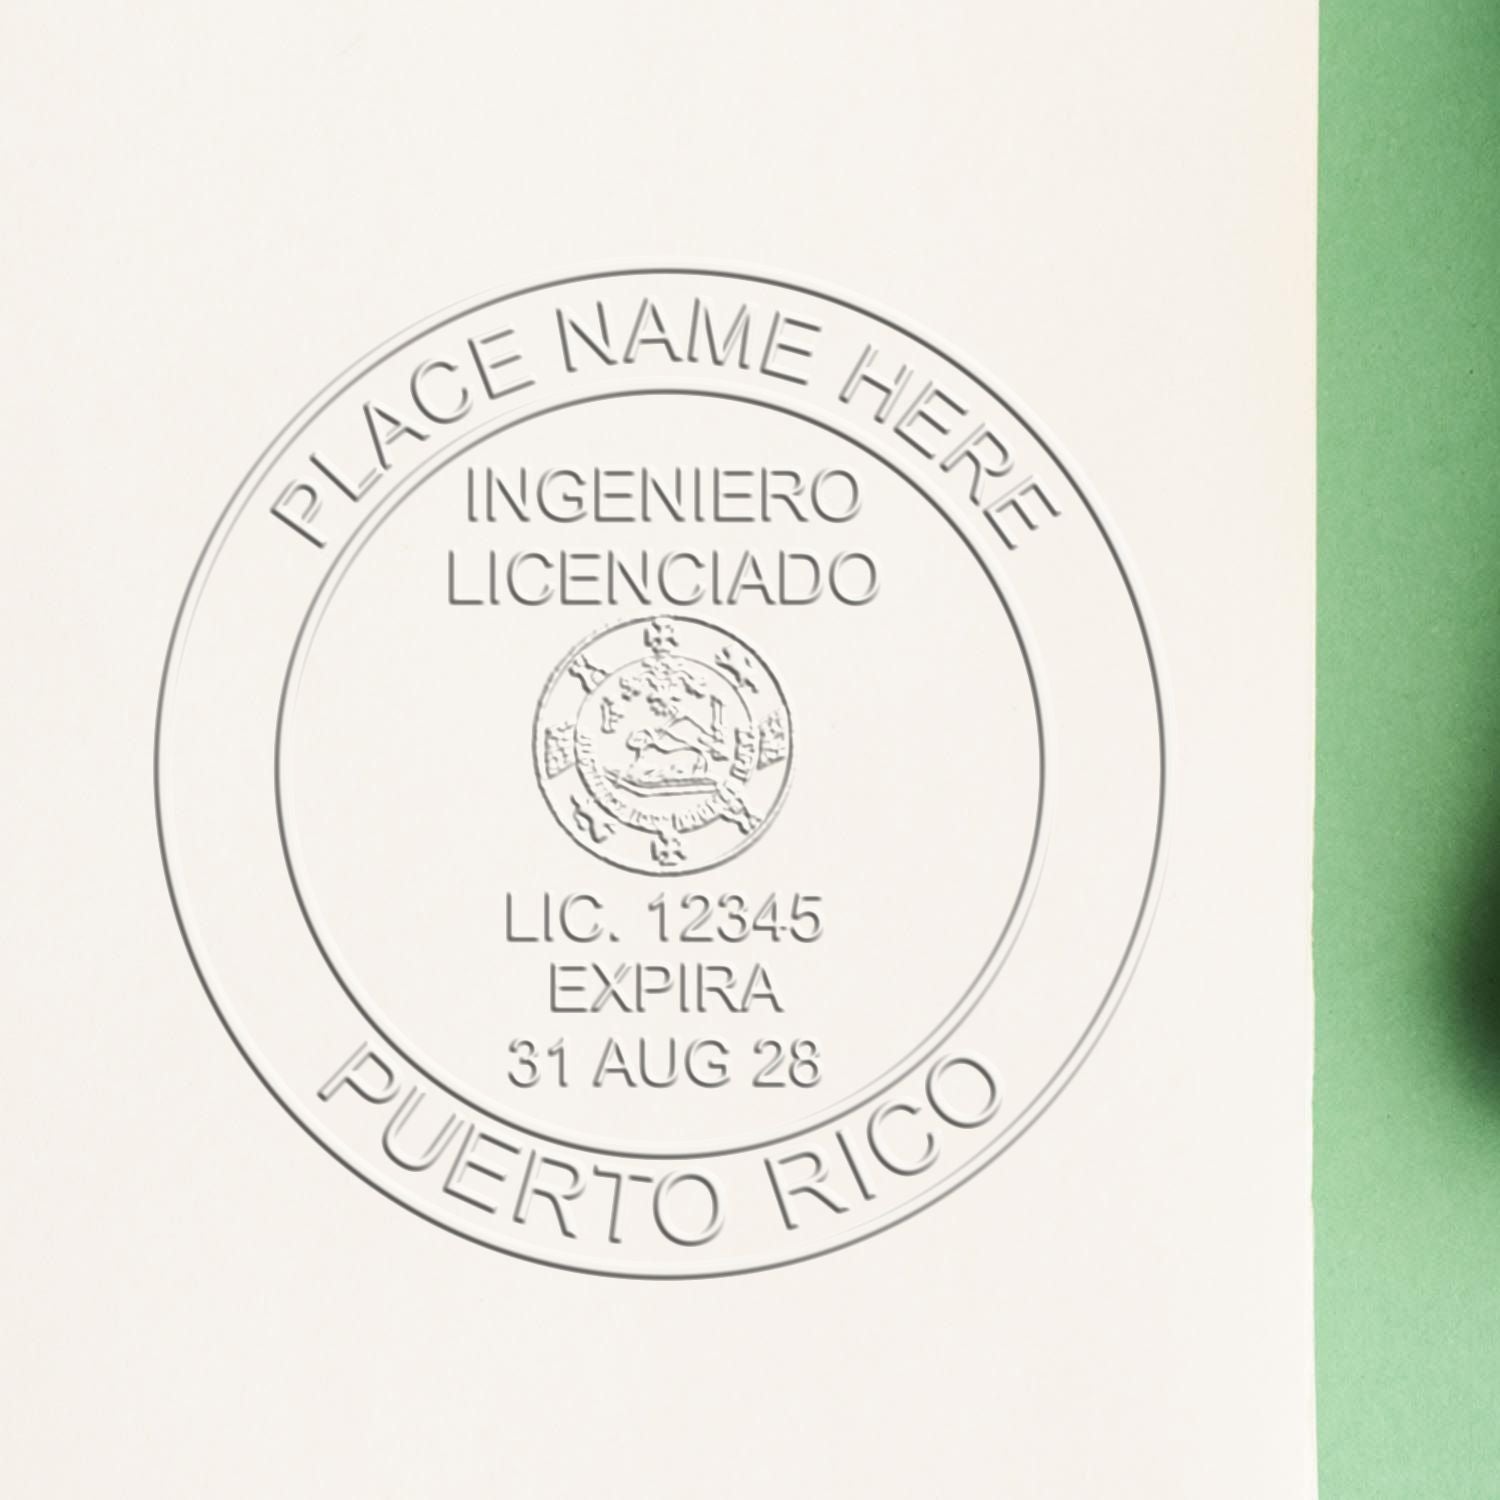 The State of Puerto Rico Extended Long Reach Engineer Seal stamp impression comes to life with a crisp, detailed photo on paper - showcasing true professional quality.